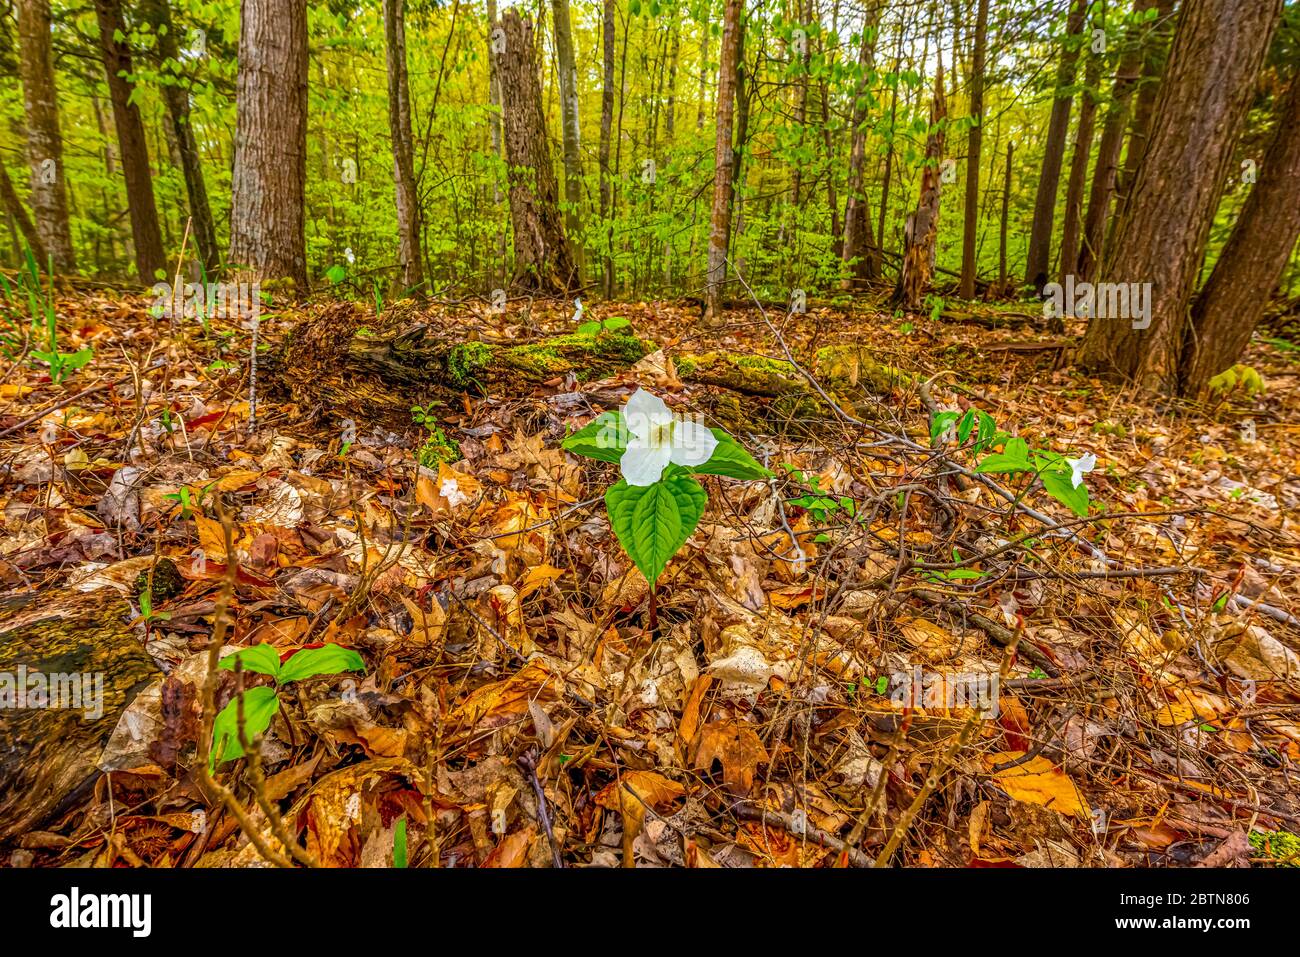 A white flower of a trillium (Trillium grandiflorum) blooming in the spring on Old Mission Peninsula, Traverse City, Michigan, USA. Stock Photo